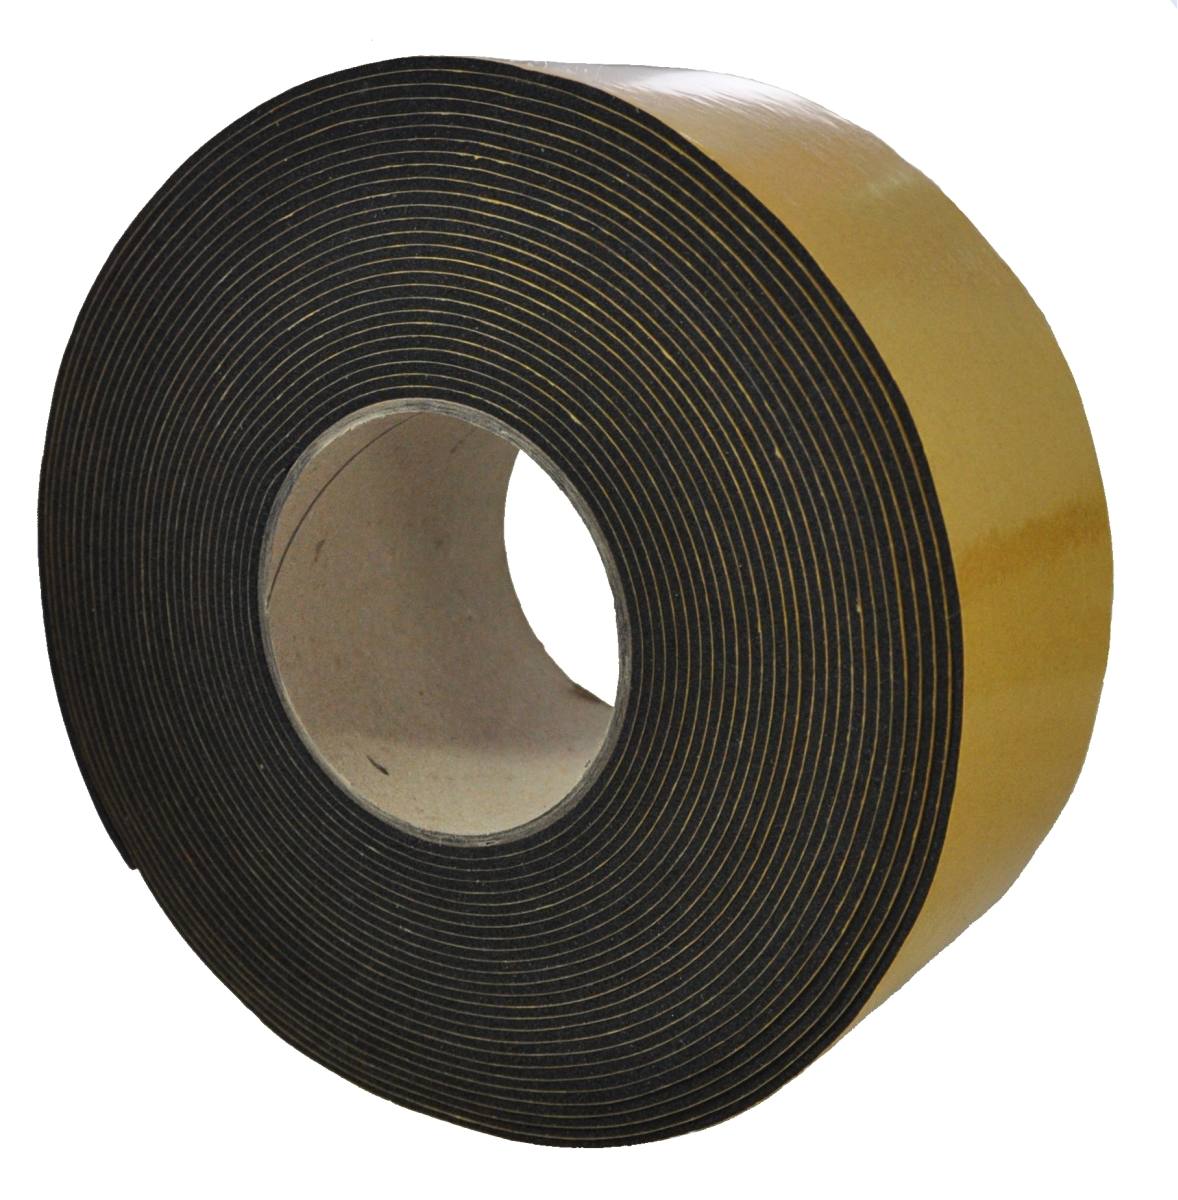 S-K-S EPDM 2mmx12mmx10m black self-adhesive on one side